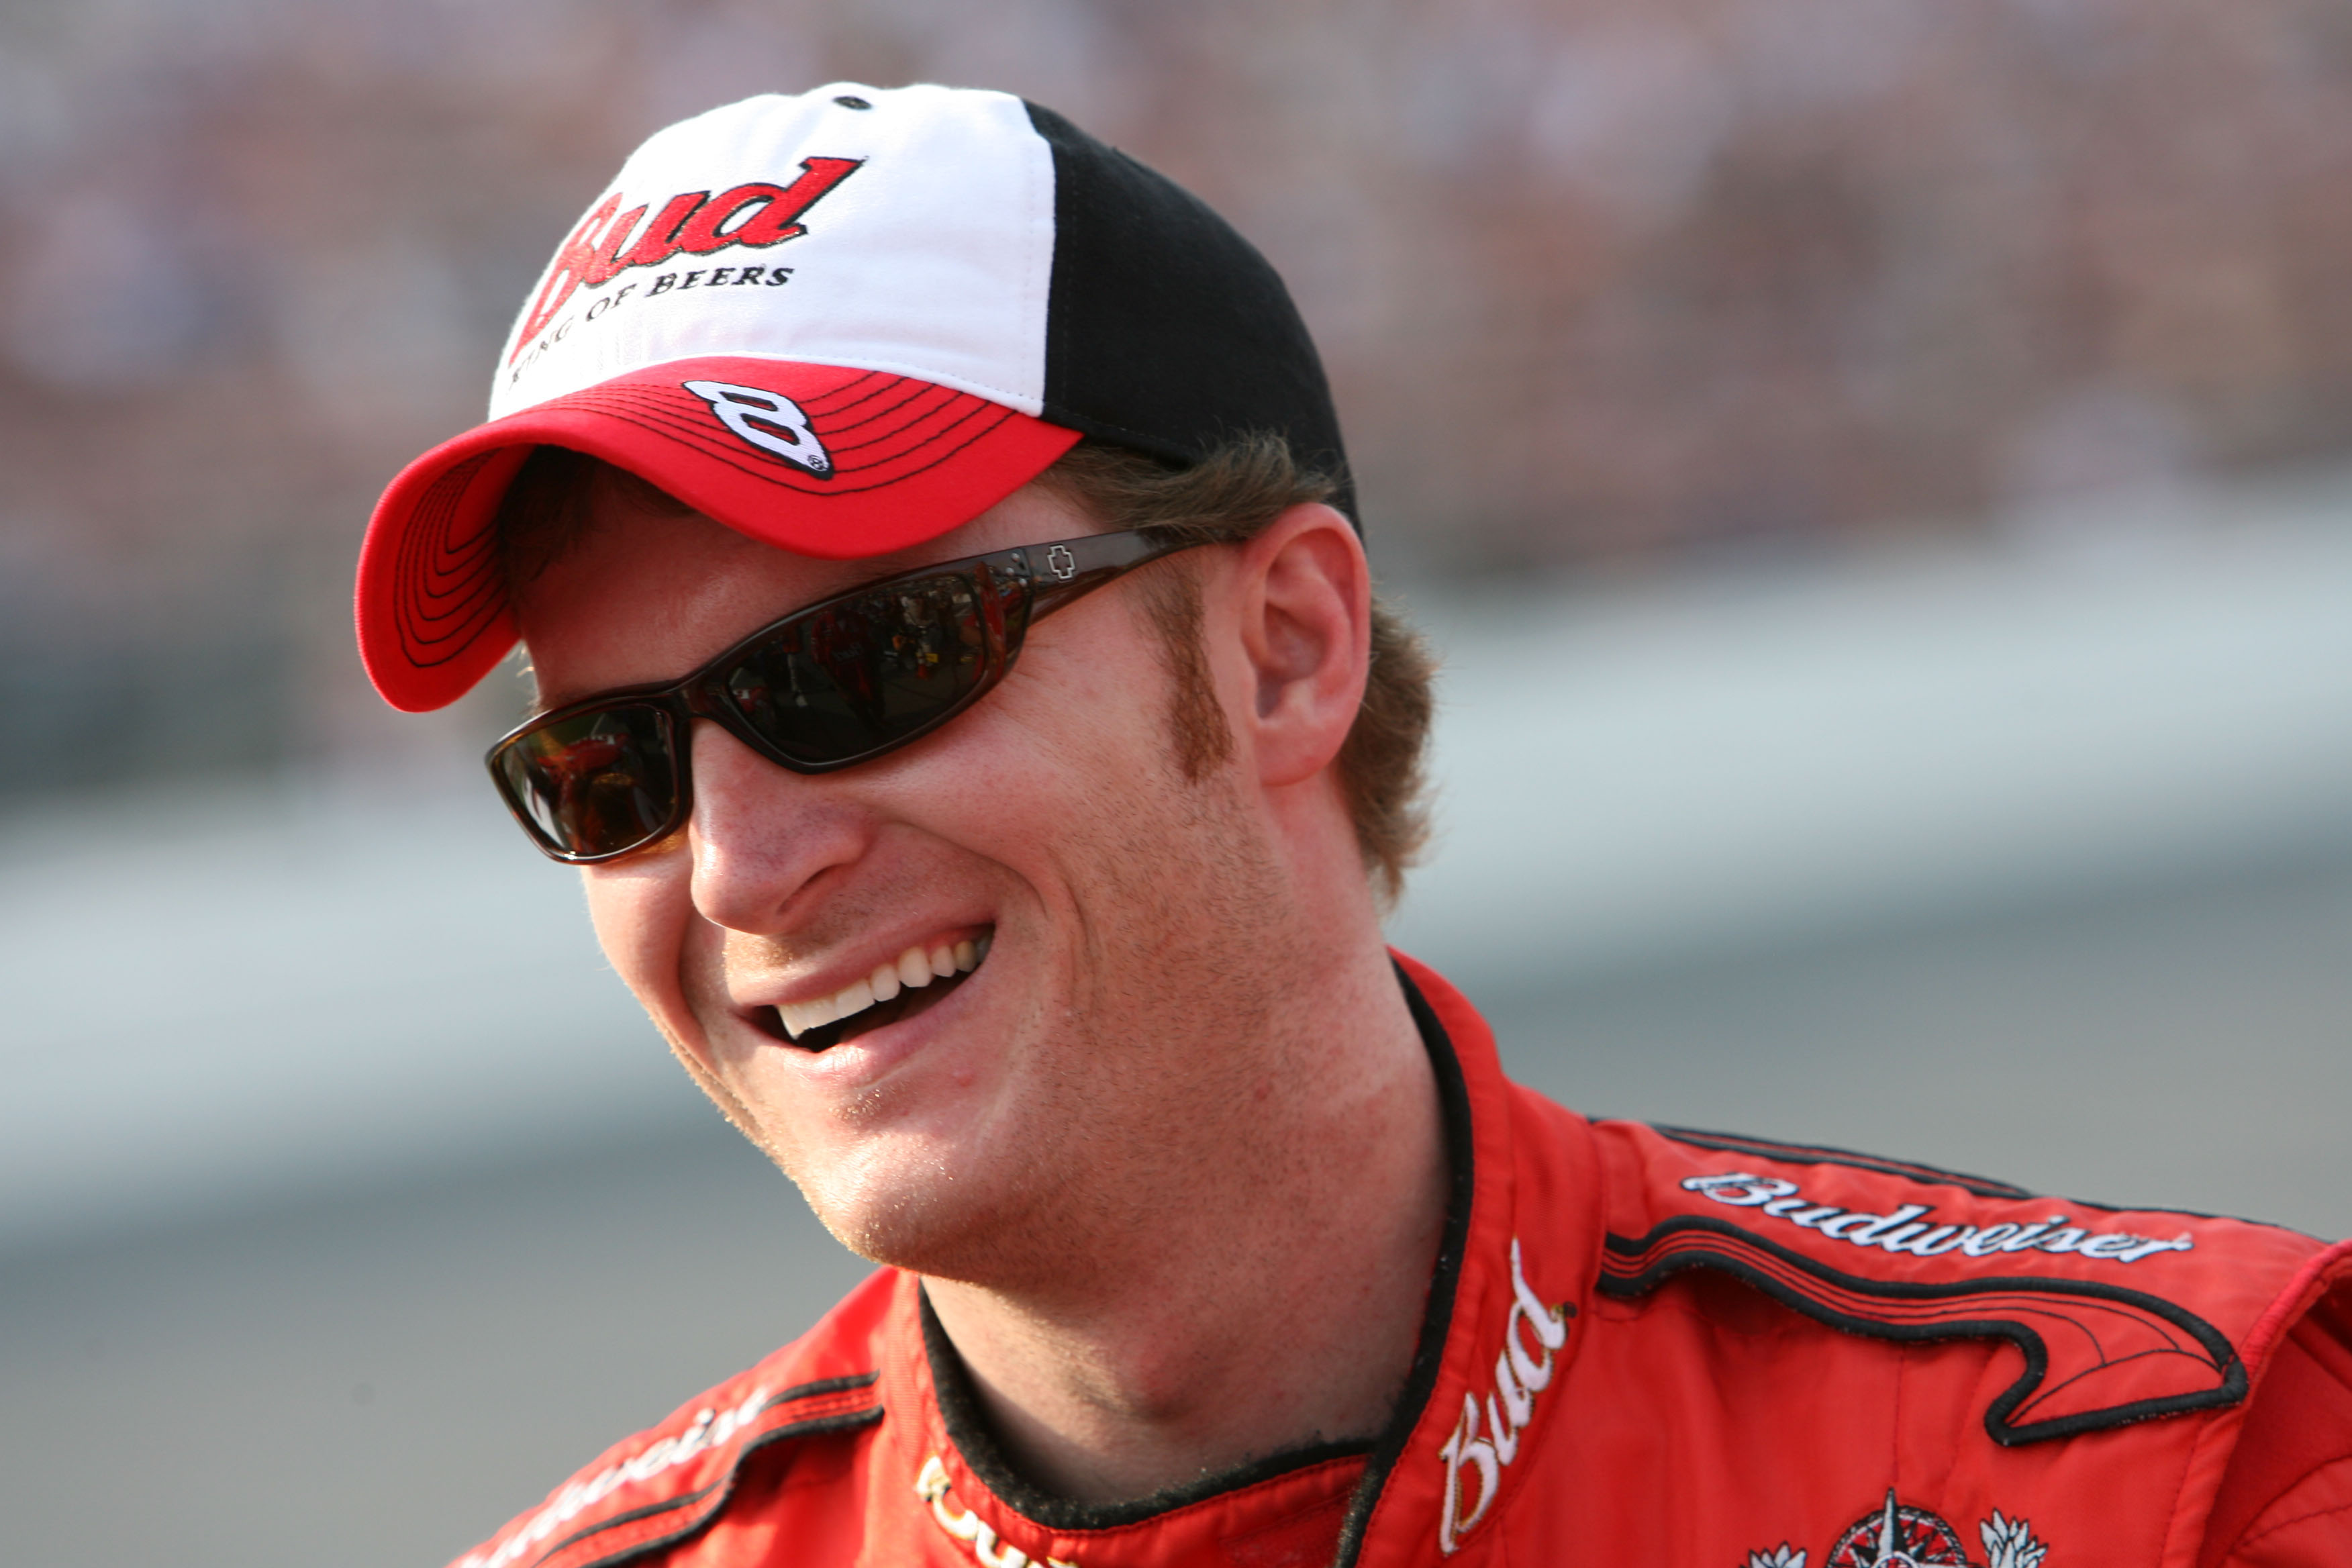 Dale Earnhardt Jr. felt a little pressure having to live up to the family name.